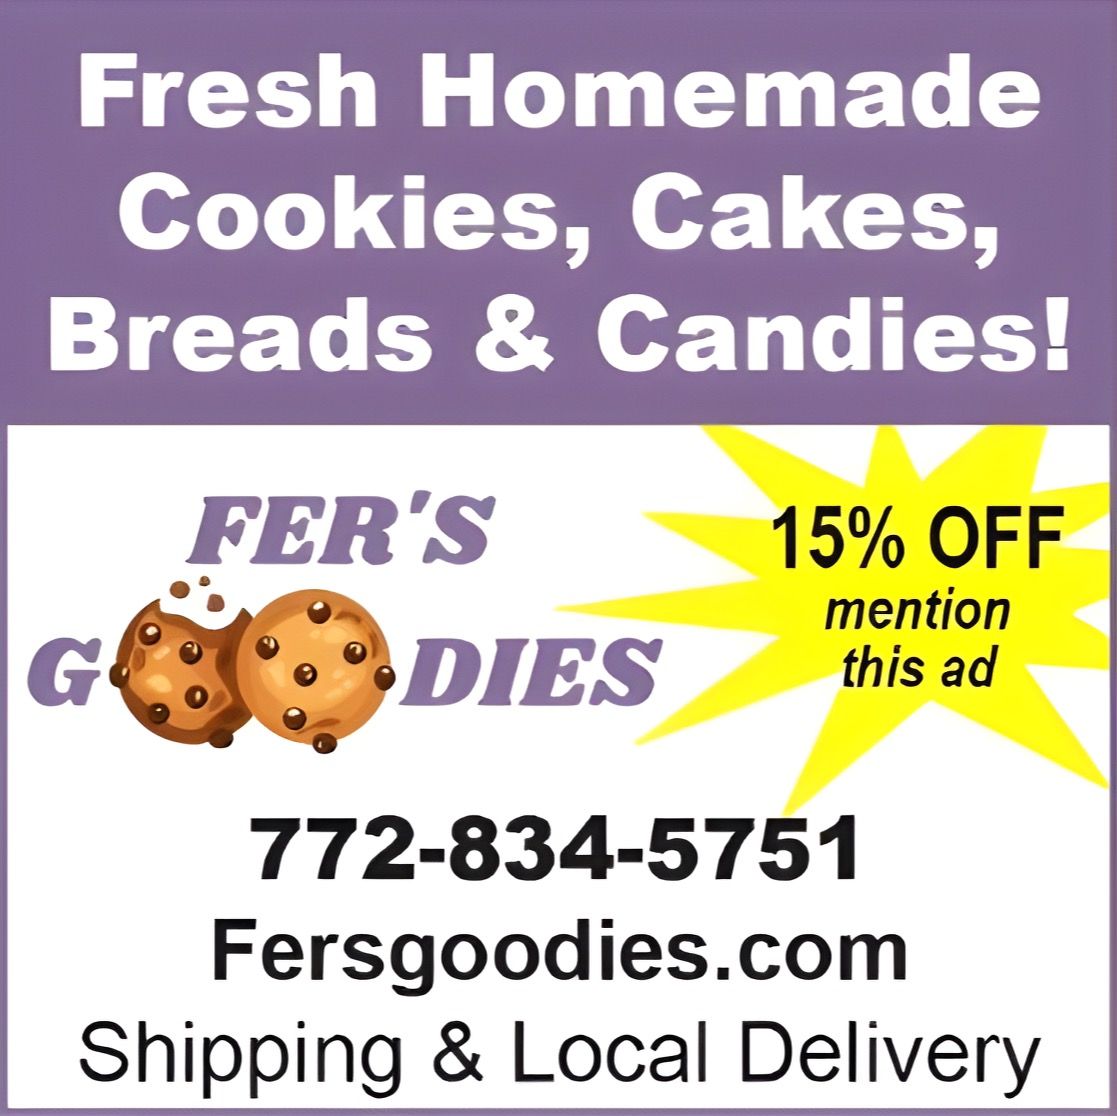 Check out Fer's Goodies for fresh homemade cookies, cakes, breads, and candies!! Mention this OPG ad for 15% OFF your order!!  #homemade #bakedgoods #cookies #homemadebread #homemadecandy #saintluciecounty #florida #orangepeeladvertiser